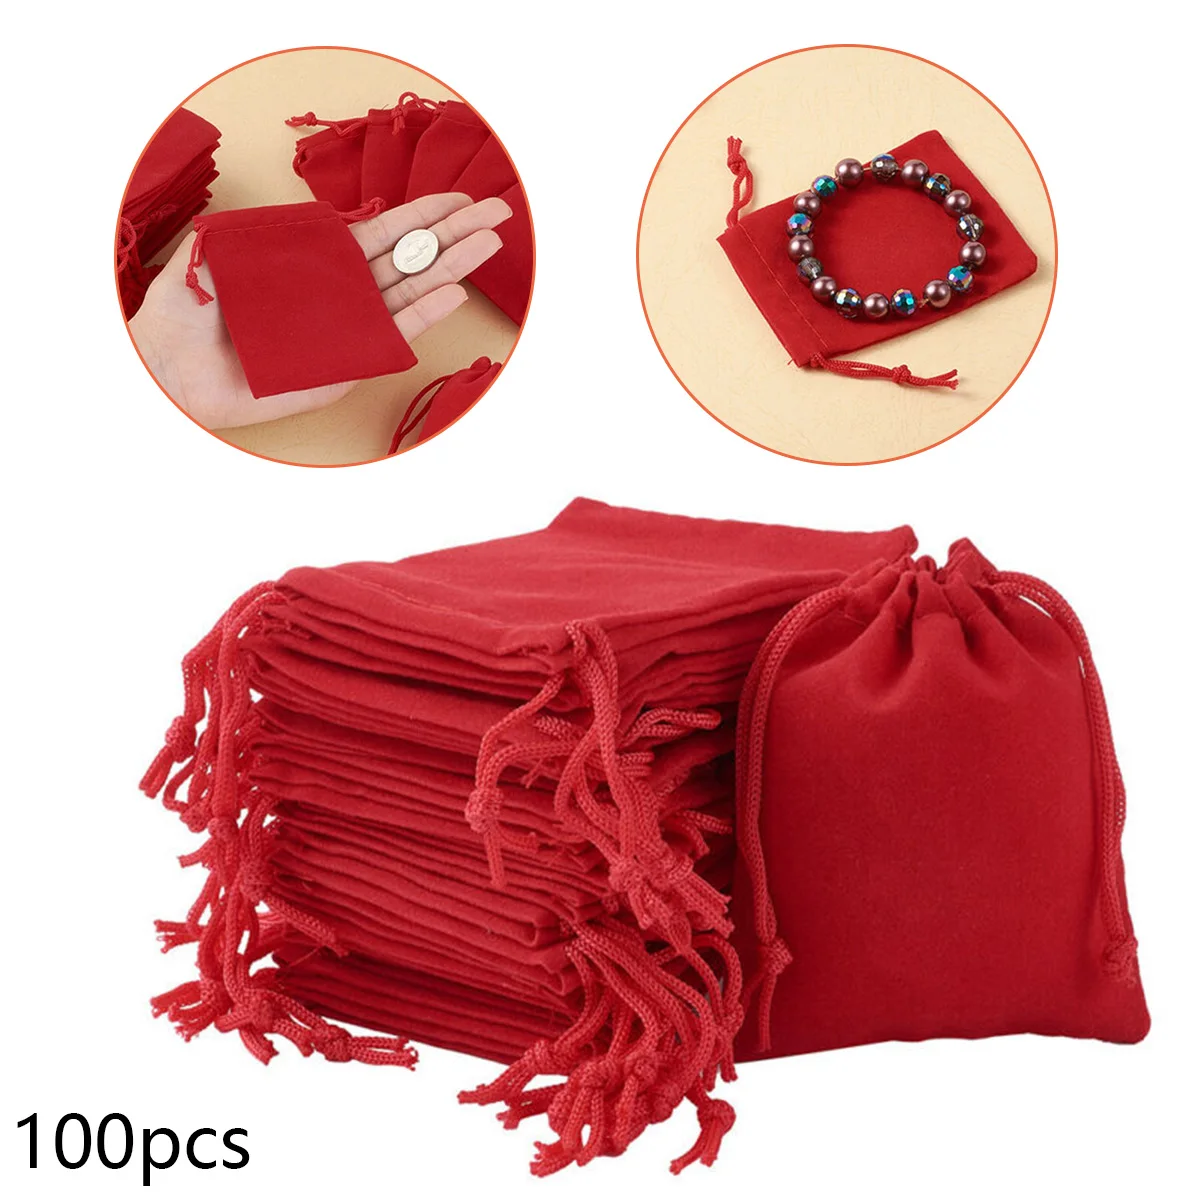 

100pcs Drawstring Velvet Jewelry Bags Drawable Sweets Packaging Gift Bags Baby Shower Birthday Party Wedding Favors For Guests